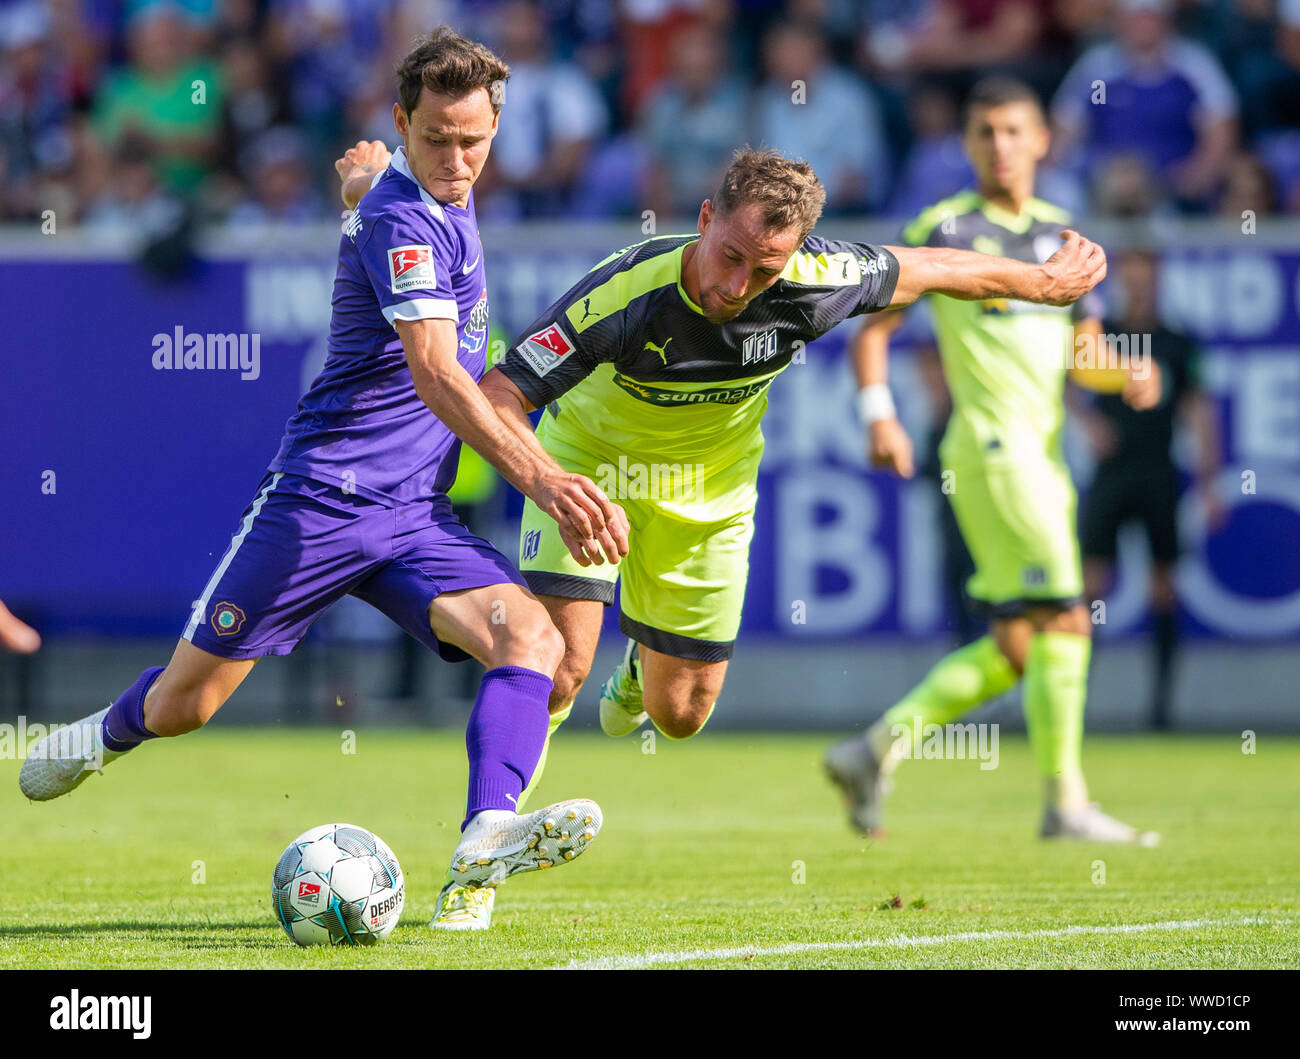 Aue, Germany. 15th Sep, 2019. Soccer: 2nd Bundesliga, Erzgebirge Aue - VfL Osnabrück, 6th matchday, in the Sparkassen-Erzgebirgsstadion. Aues Clemens Fandrich (l) against Osnabrück's Ulrich Taffertshofer. Credit: Robert Michael/dpa-Zentralbild/dpa - IMPORTANT NOTE: In accordance with the requirements of the DFL Deutsche Fußball Liga or the DFB Deutscher Fußball-Bund, it is prohibited to use or have used photographs taken in the stadium and/or the match in the form of sequence images and/or video-like photo sequences./dpa/Alamy Live News Stock Photo